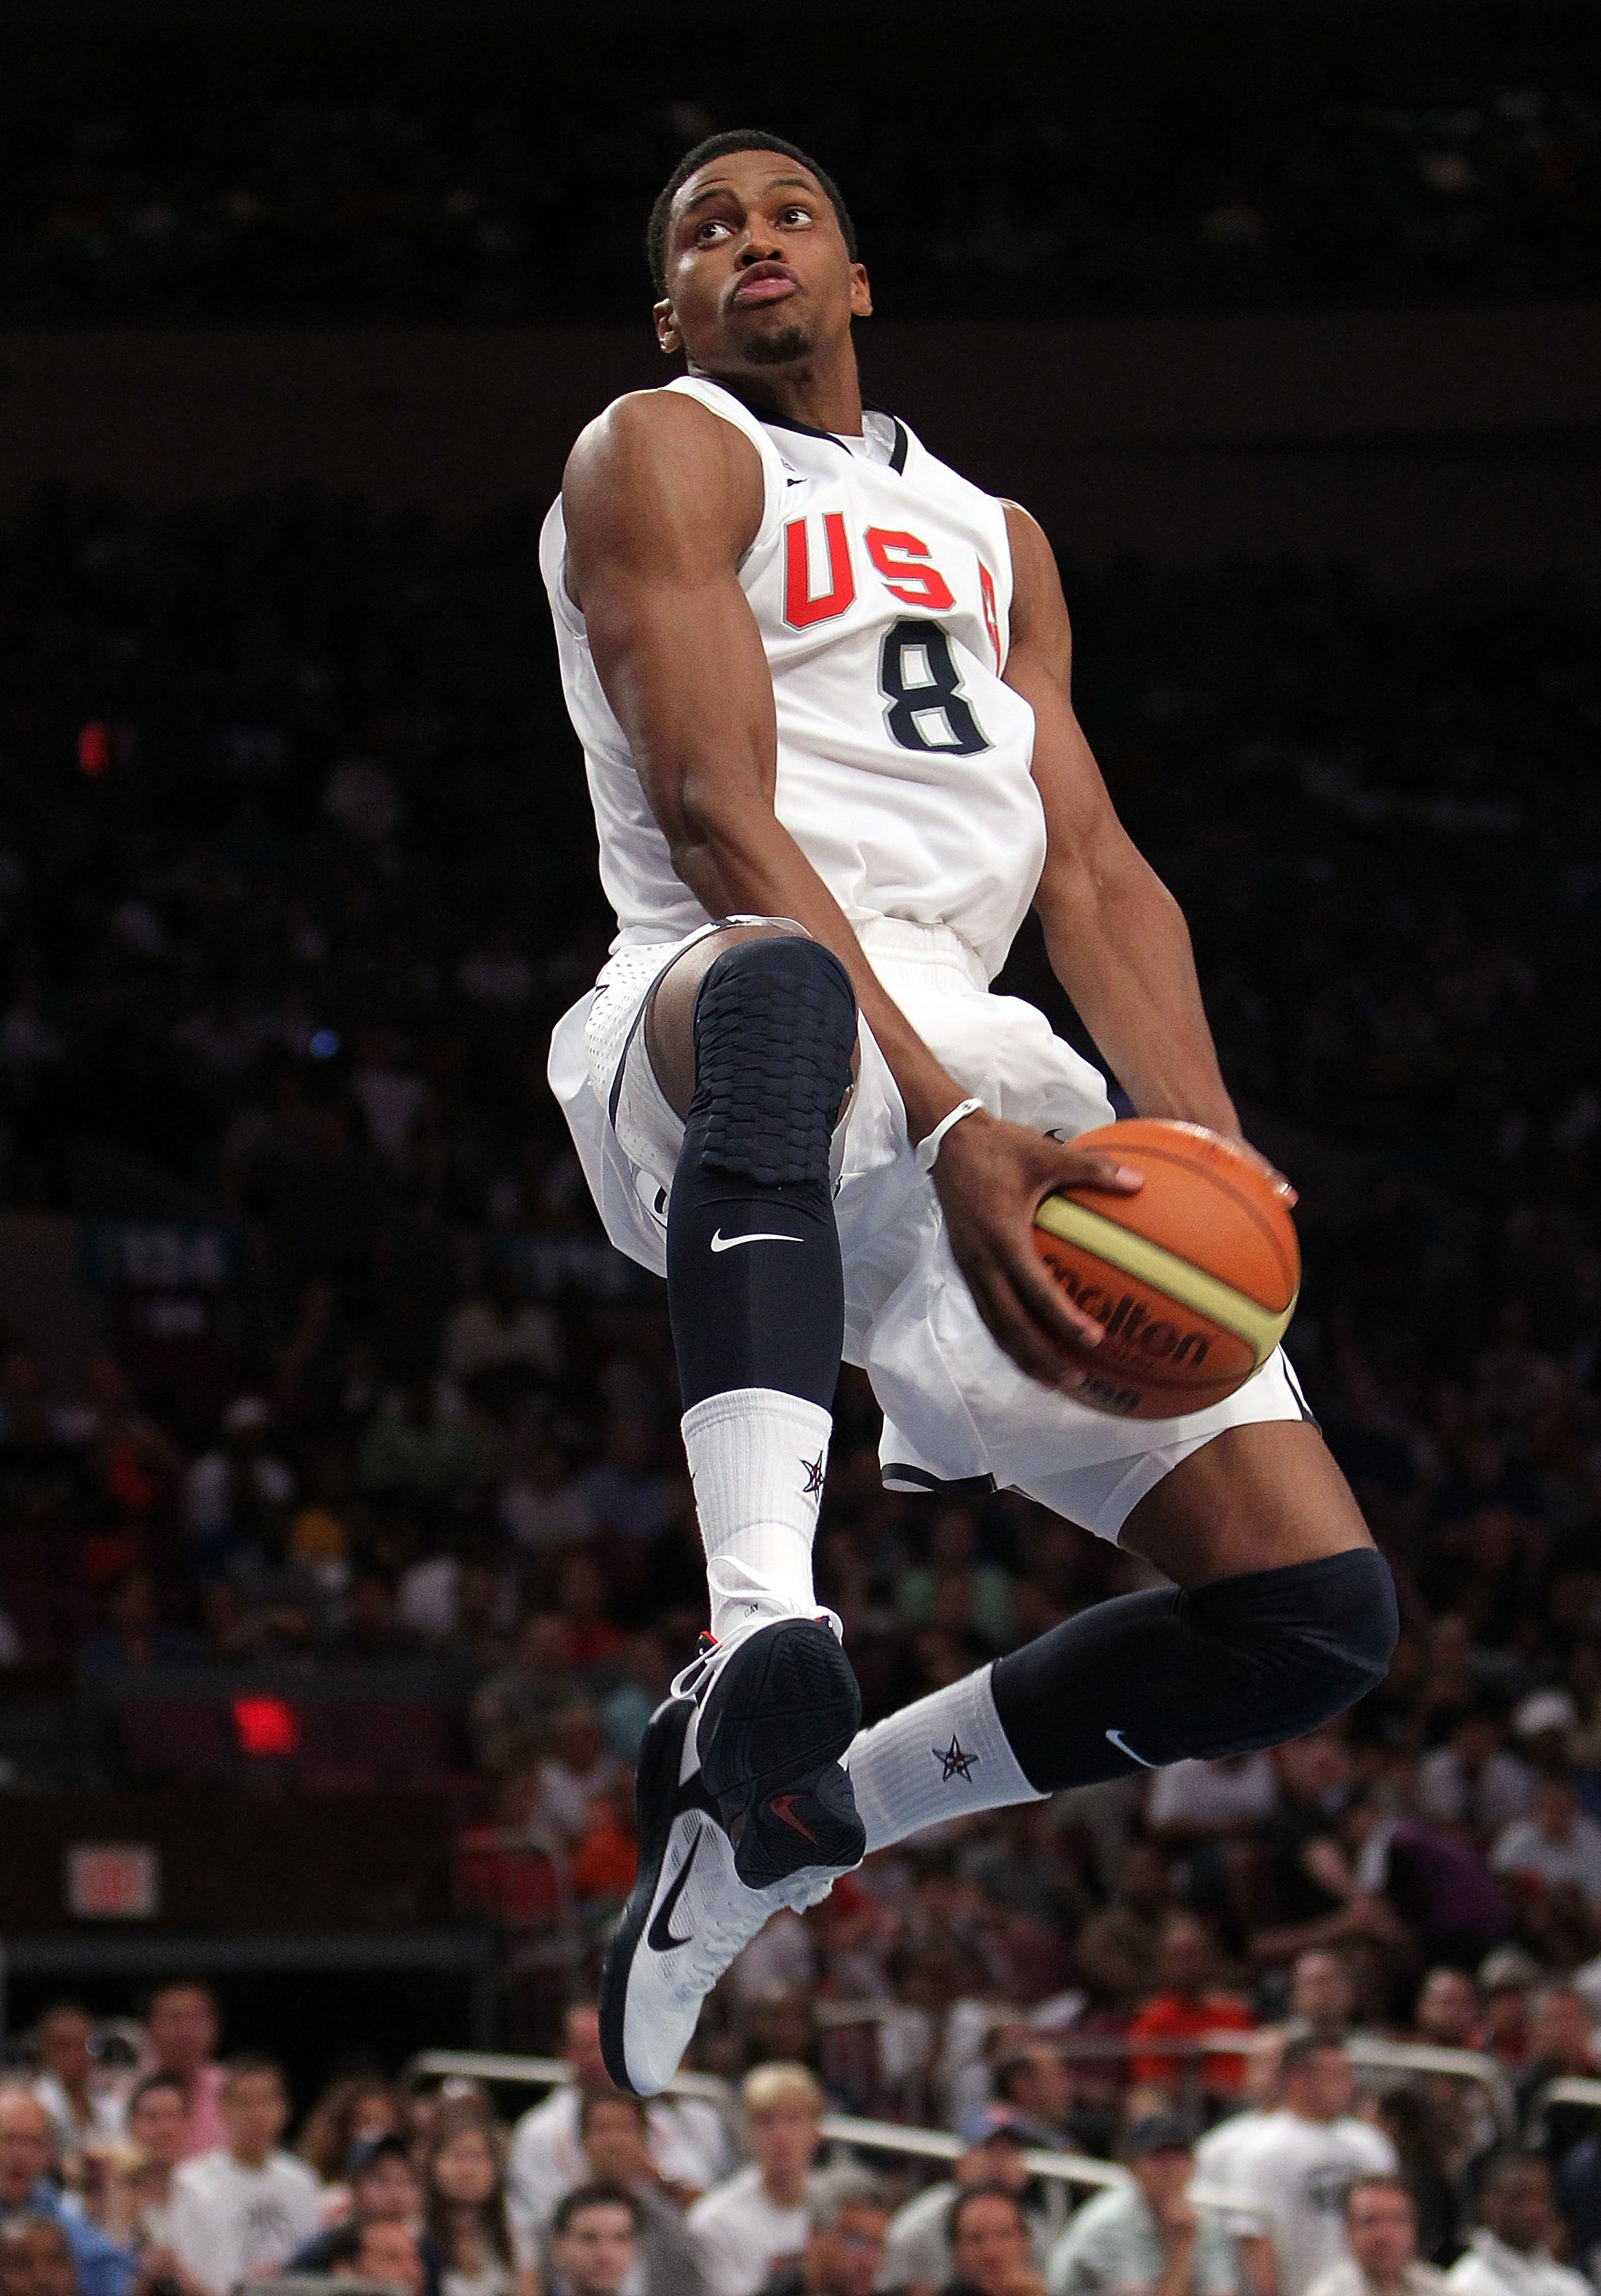 NEW YORK - AUGUST 15:  Rudy Gay #8 of the United States goes up for the dunk against France during their exhibition game as part of the World Basketball Festival at Madison Square Garden on August 15, 2010 in New York City.  (Photo by Nick Laham/Getty Ima